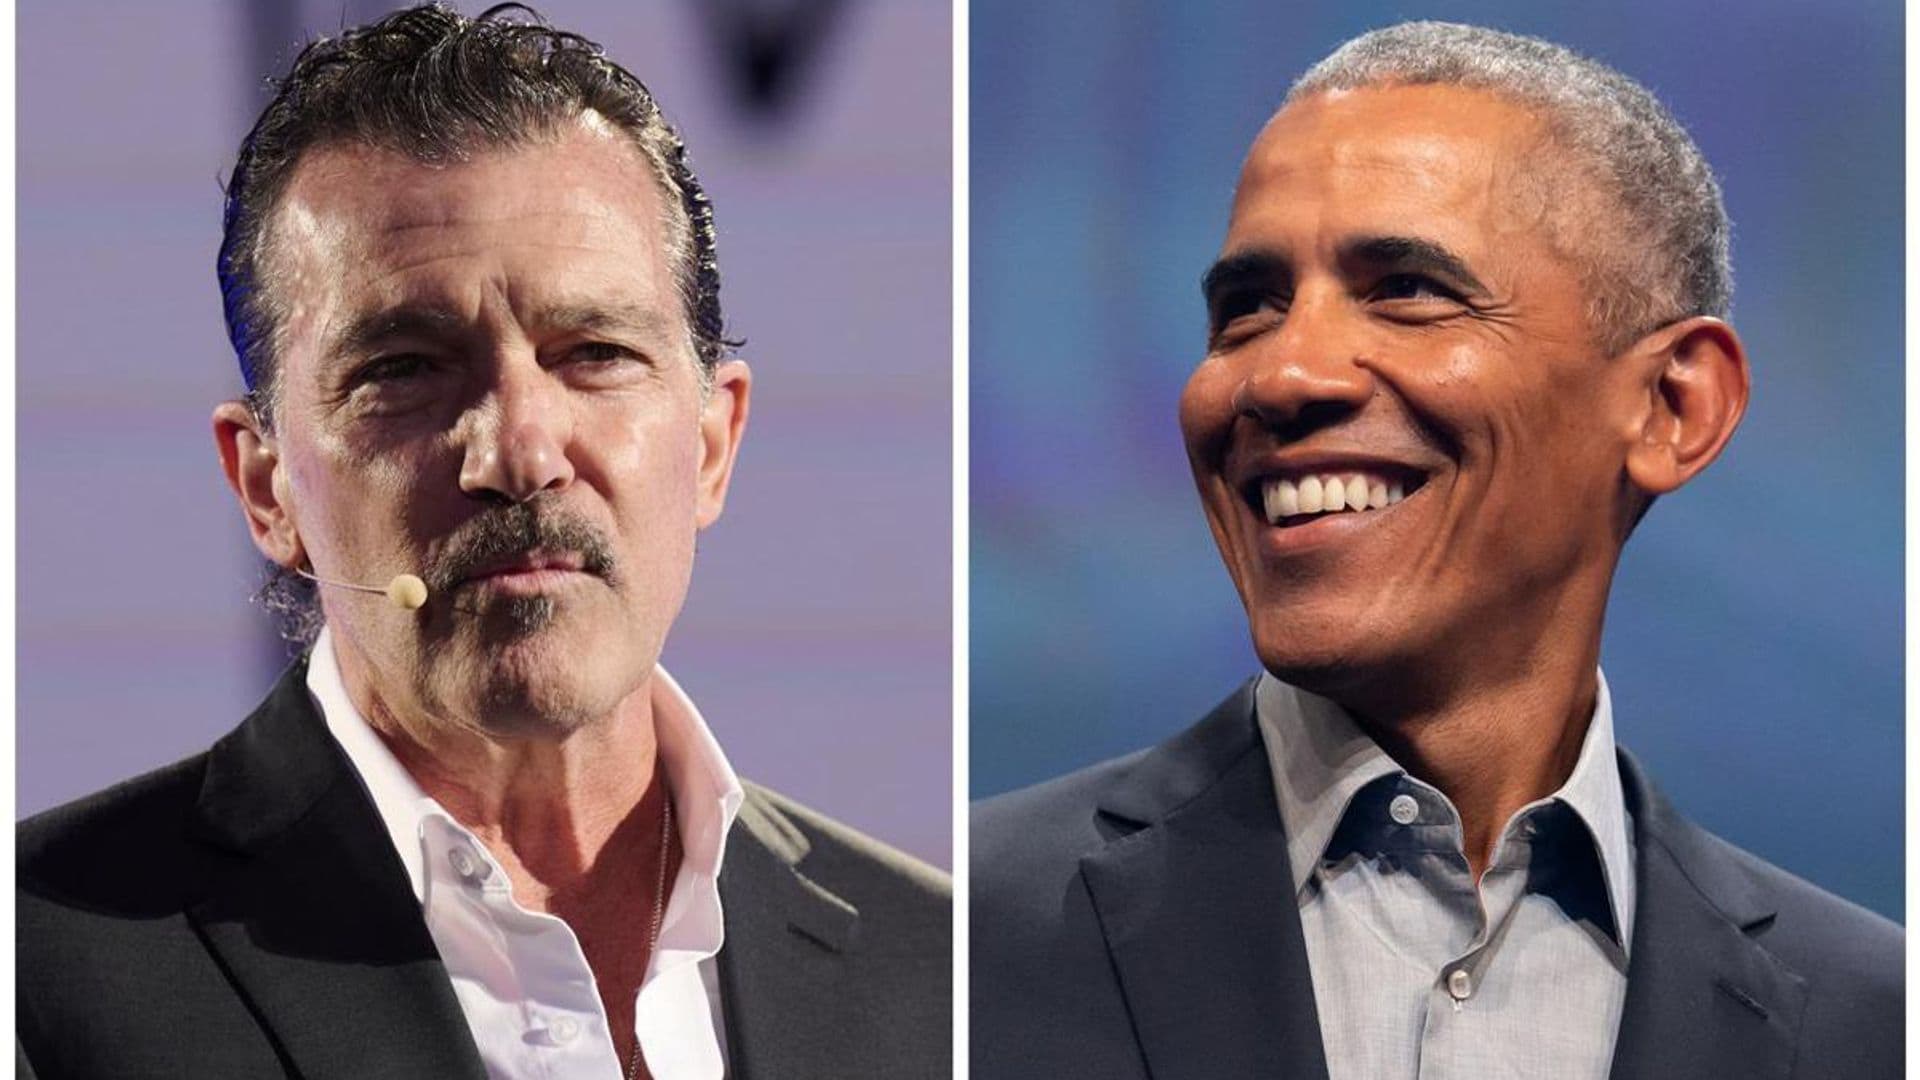 Obama Stories: Antonio Banderas remembers when he forgot his keys just before meeting the president at his home